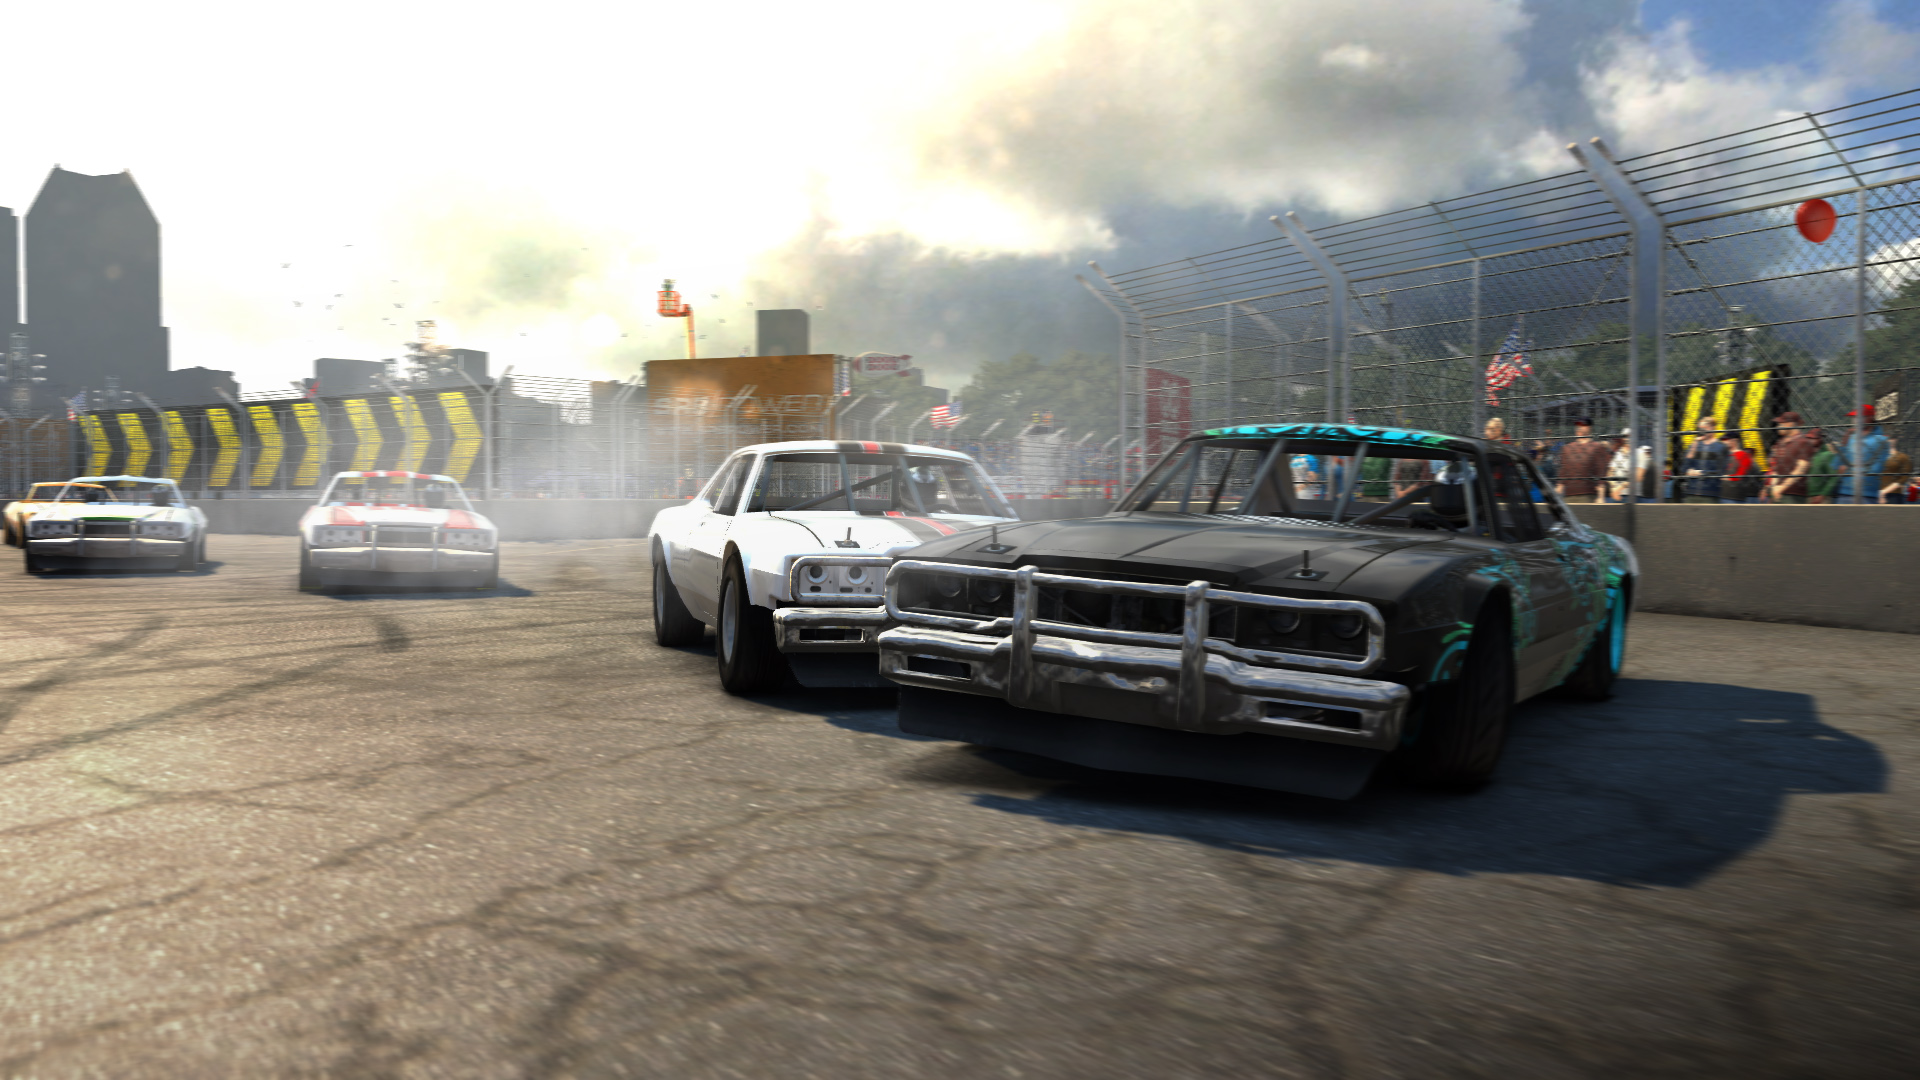 hond katoen Tussen Grid 2 Demolition Derby DLC available as free update for Xbox 360 and PC,  PS3 to follow - Team VVV